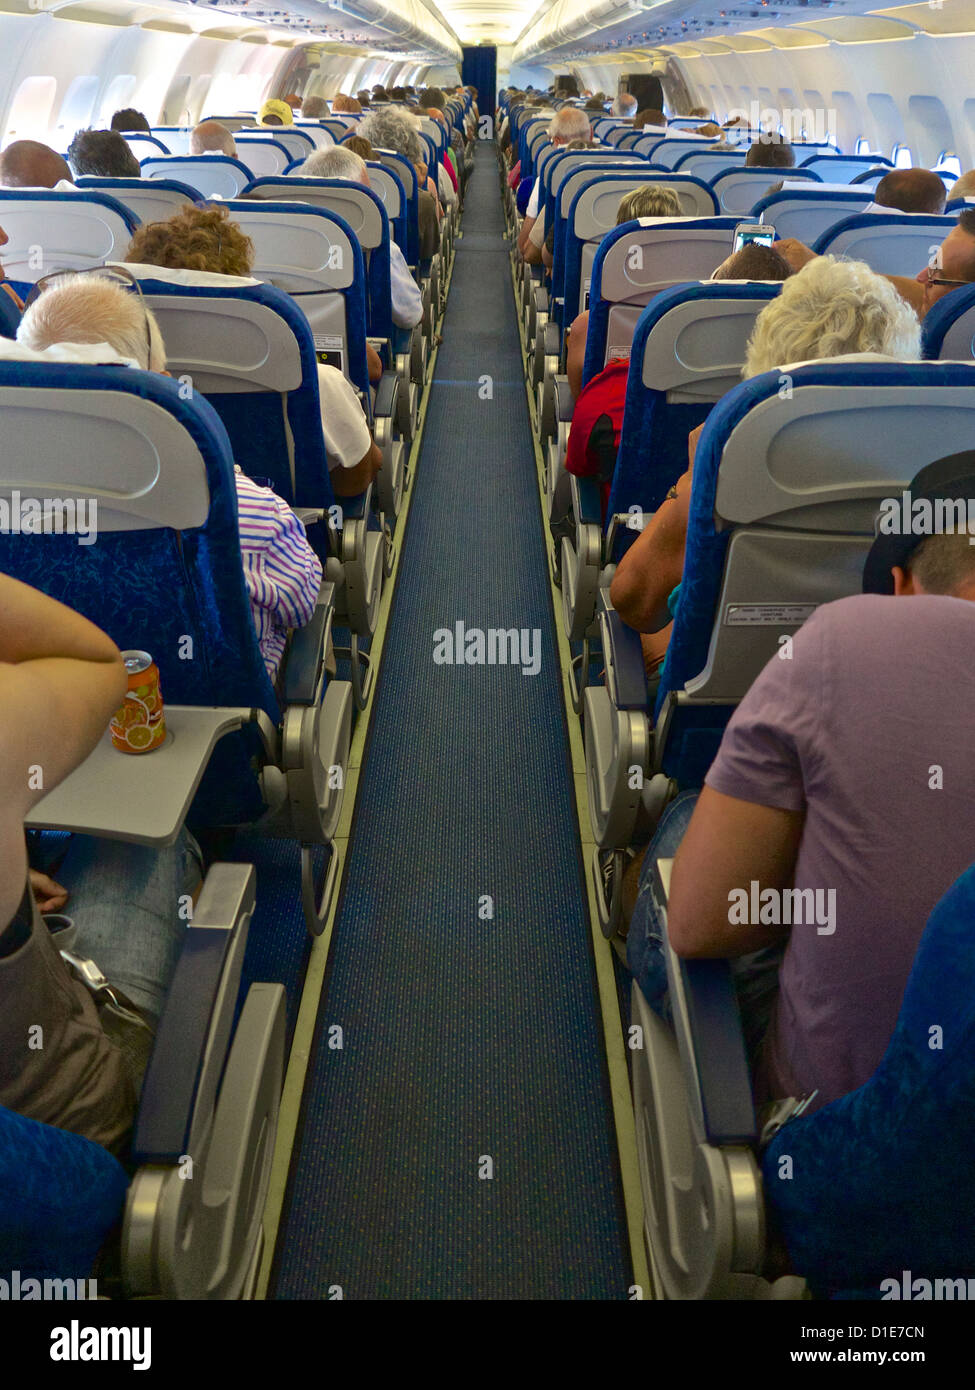 Airbus A320 plane inside cabin with passengers, France, Europe Stock Photo